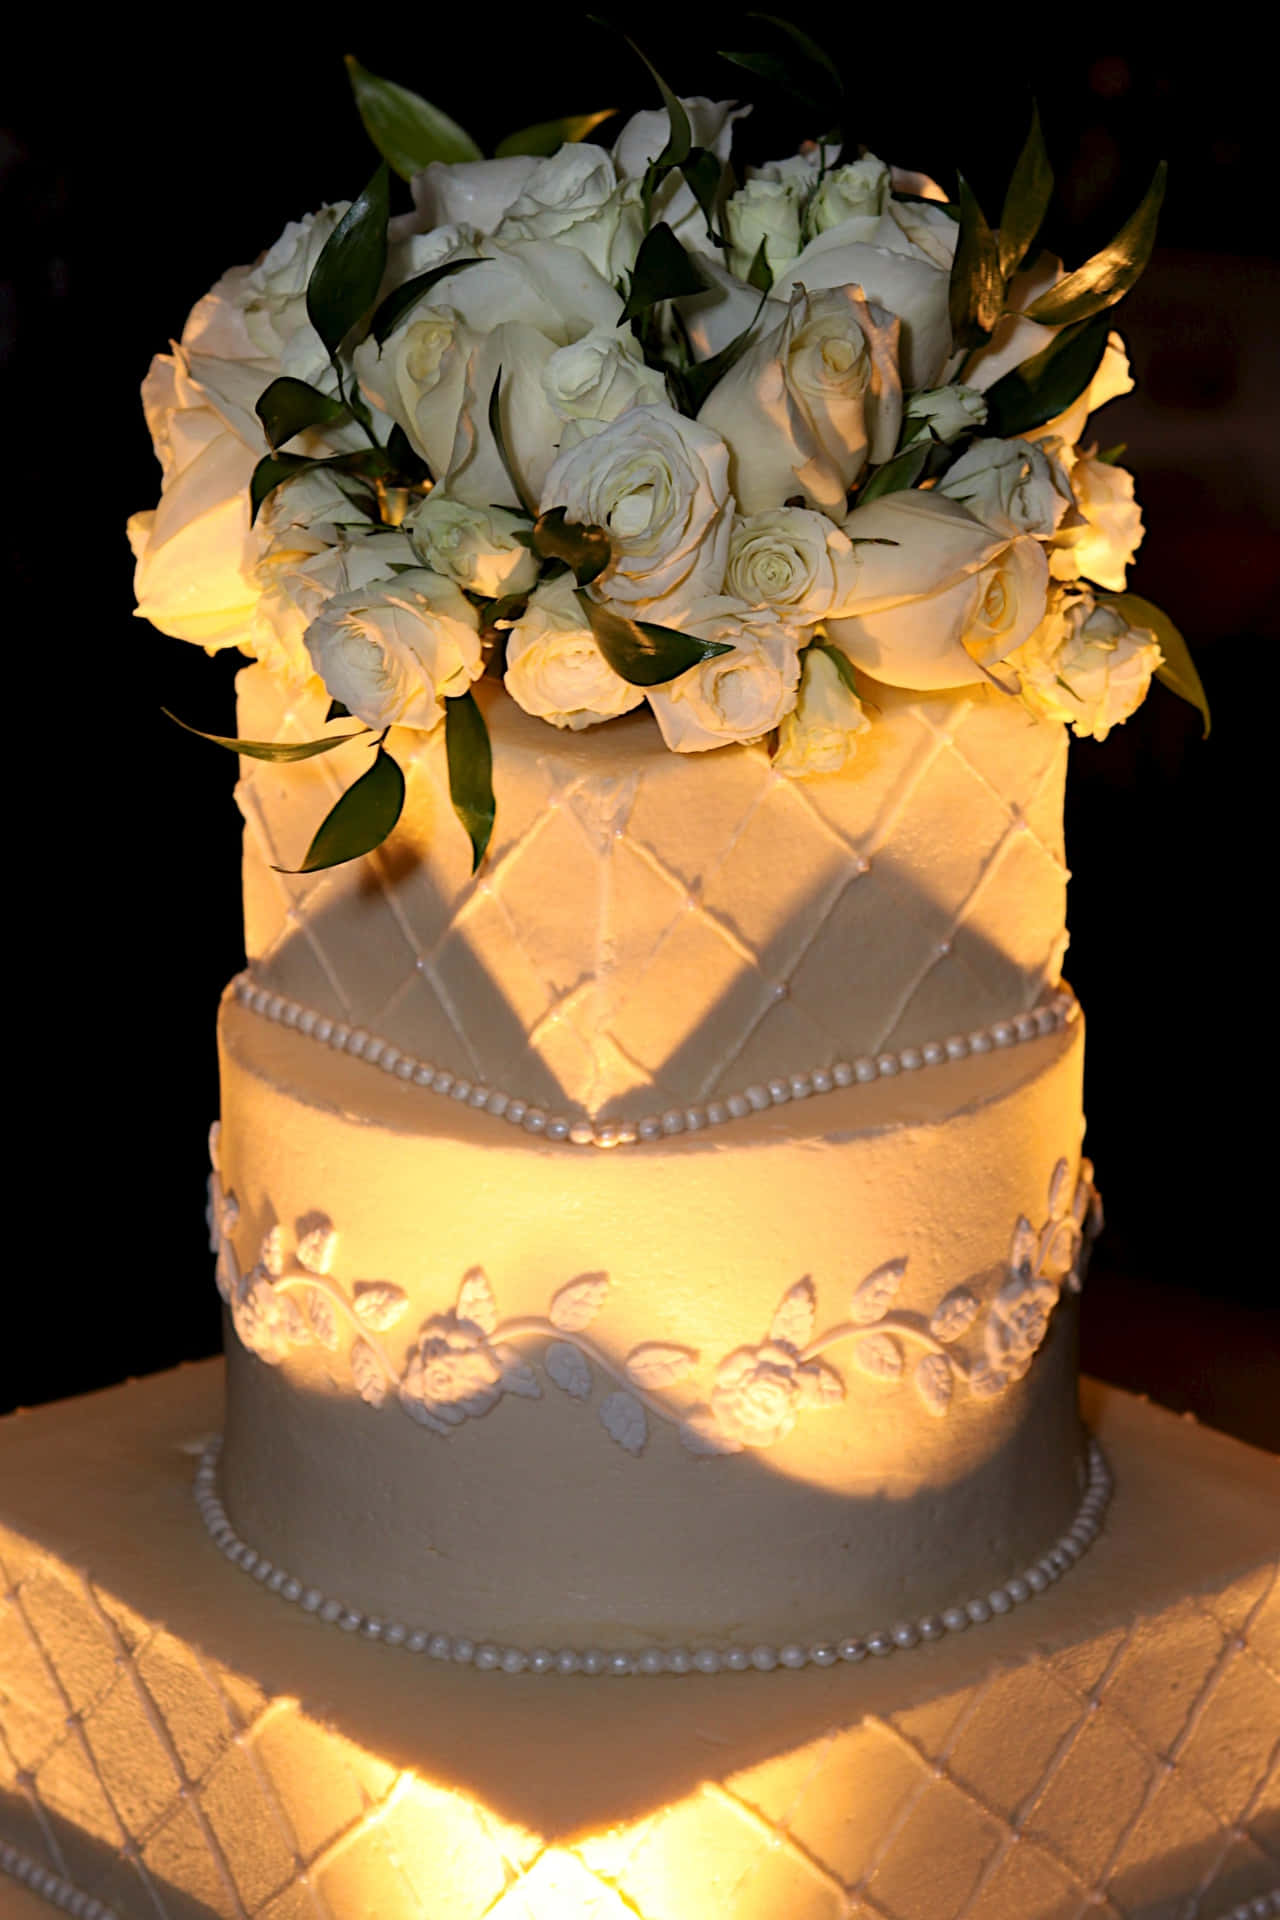 Delicious Wedding Cake with Beautiful Floral Decor